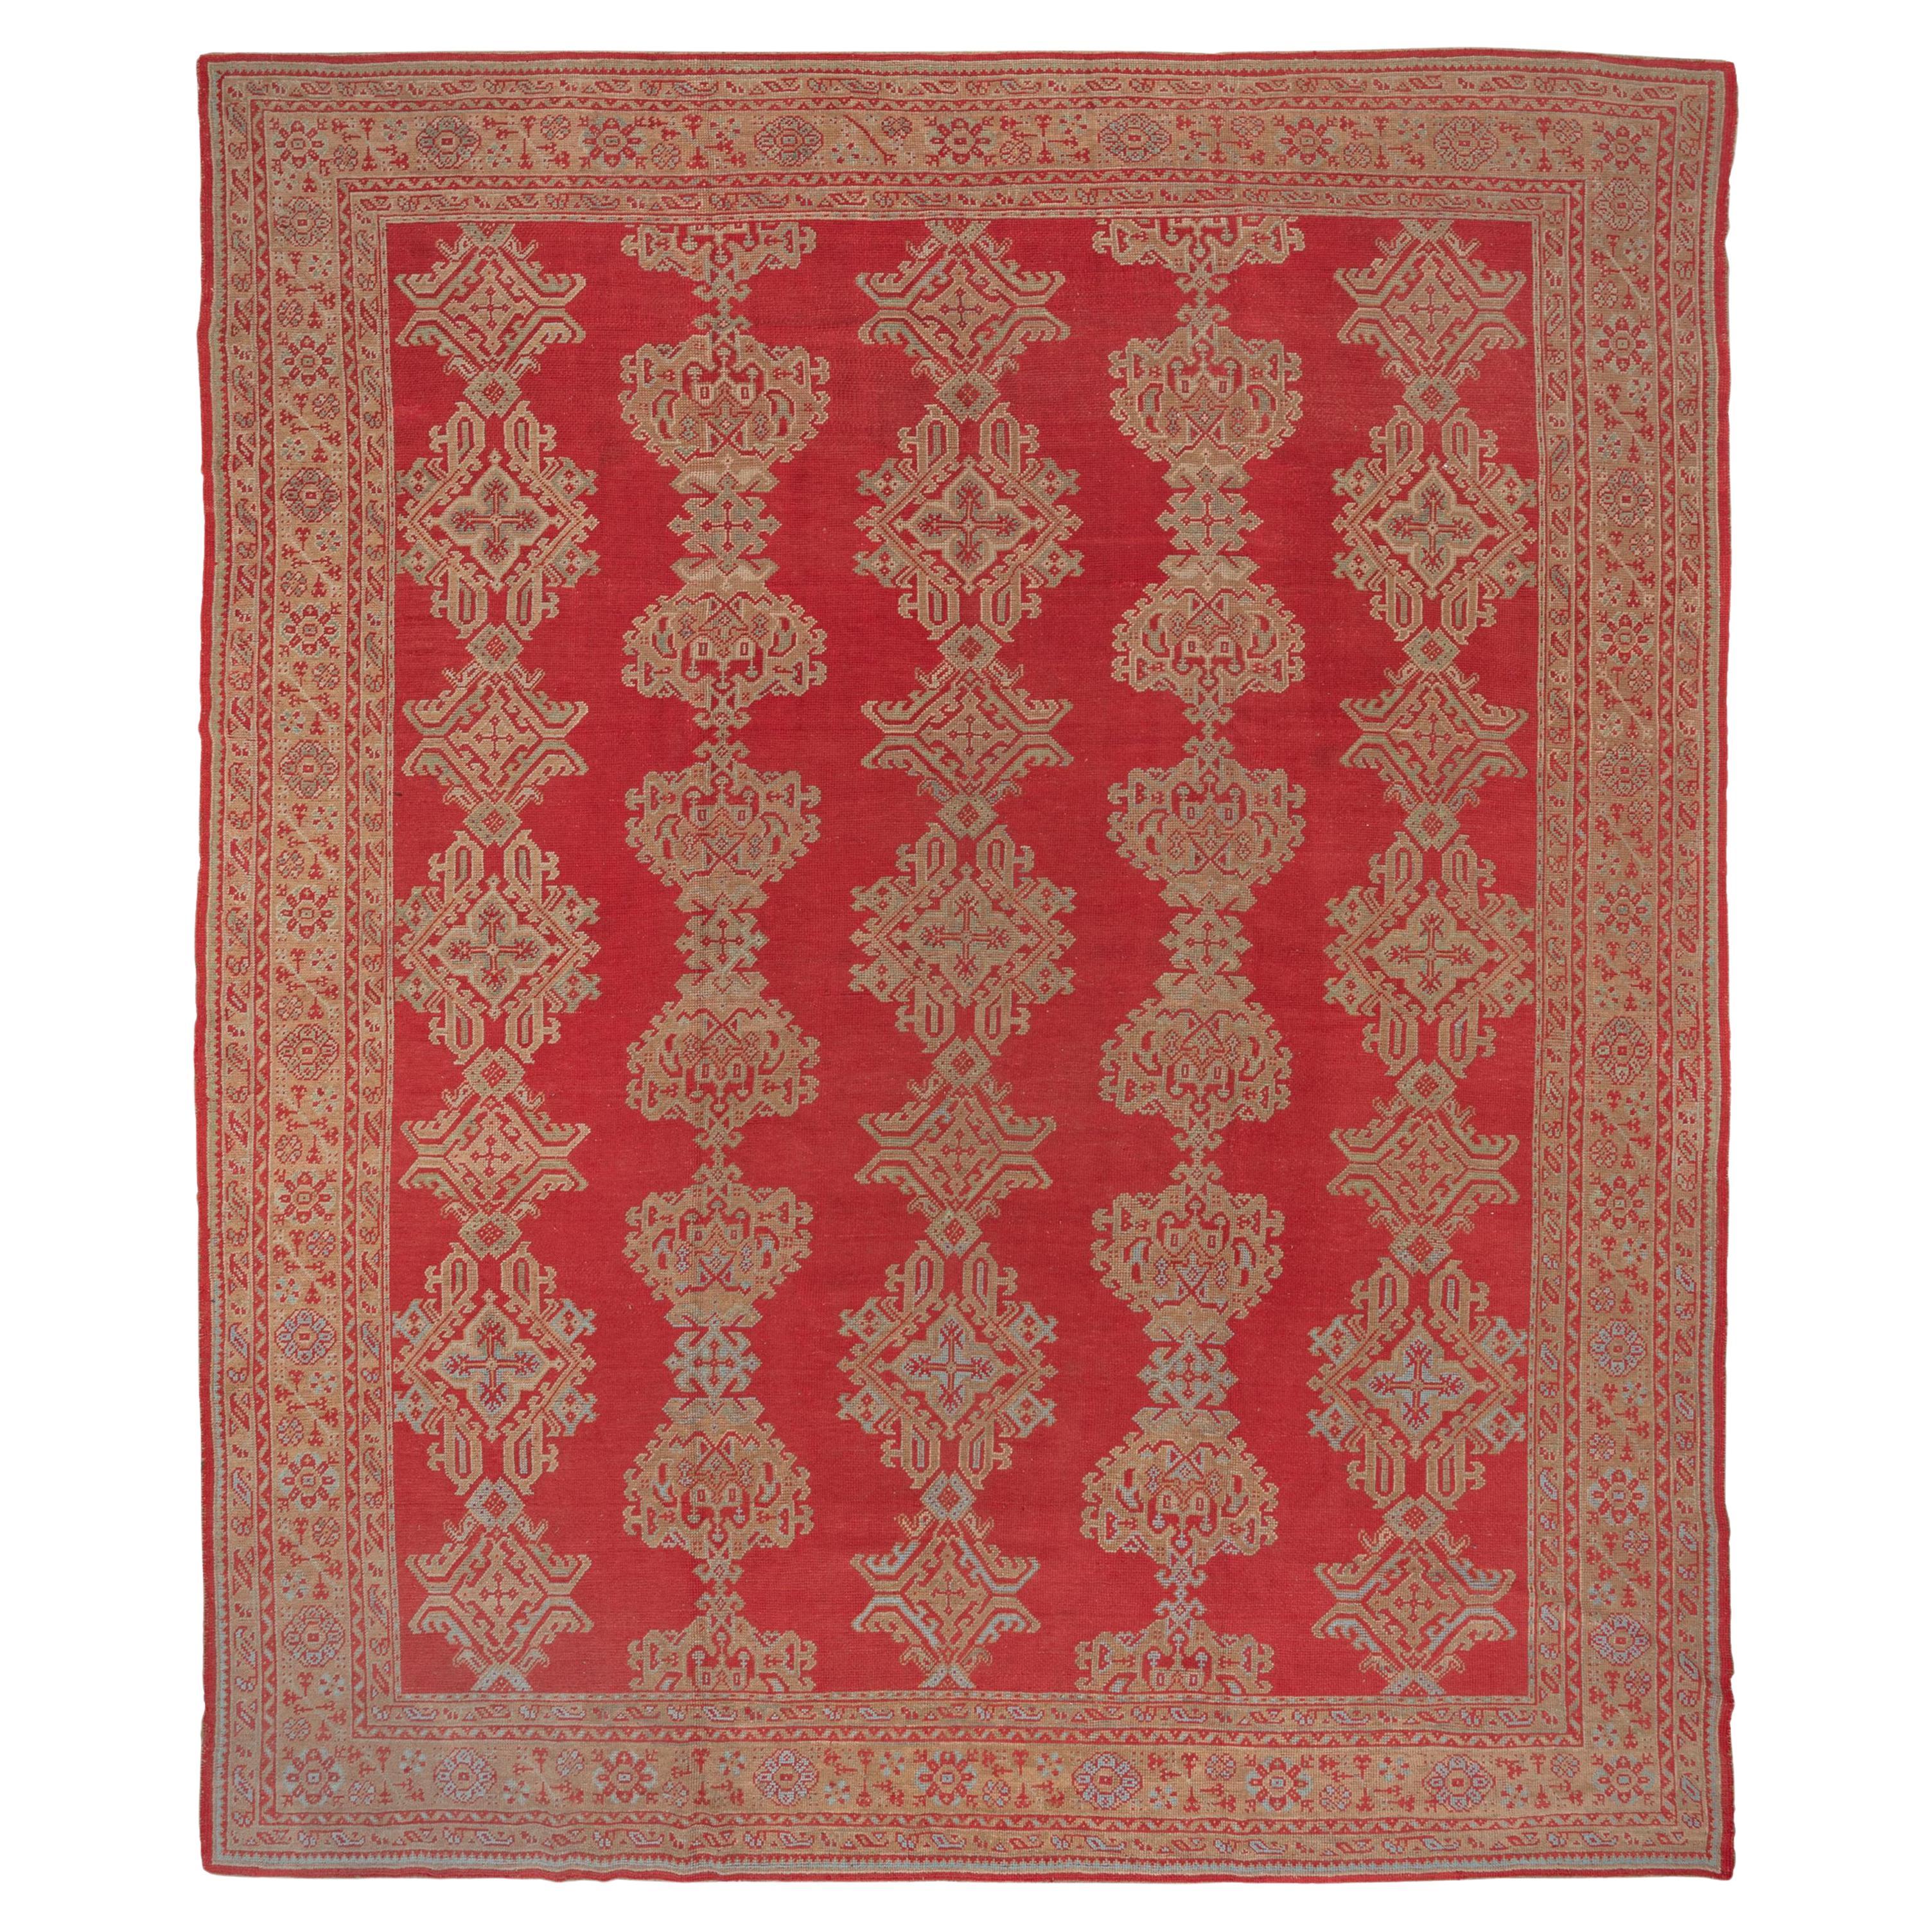 Early 20th Century Antique Red Oushak Carpet For Sale